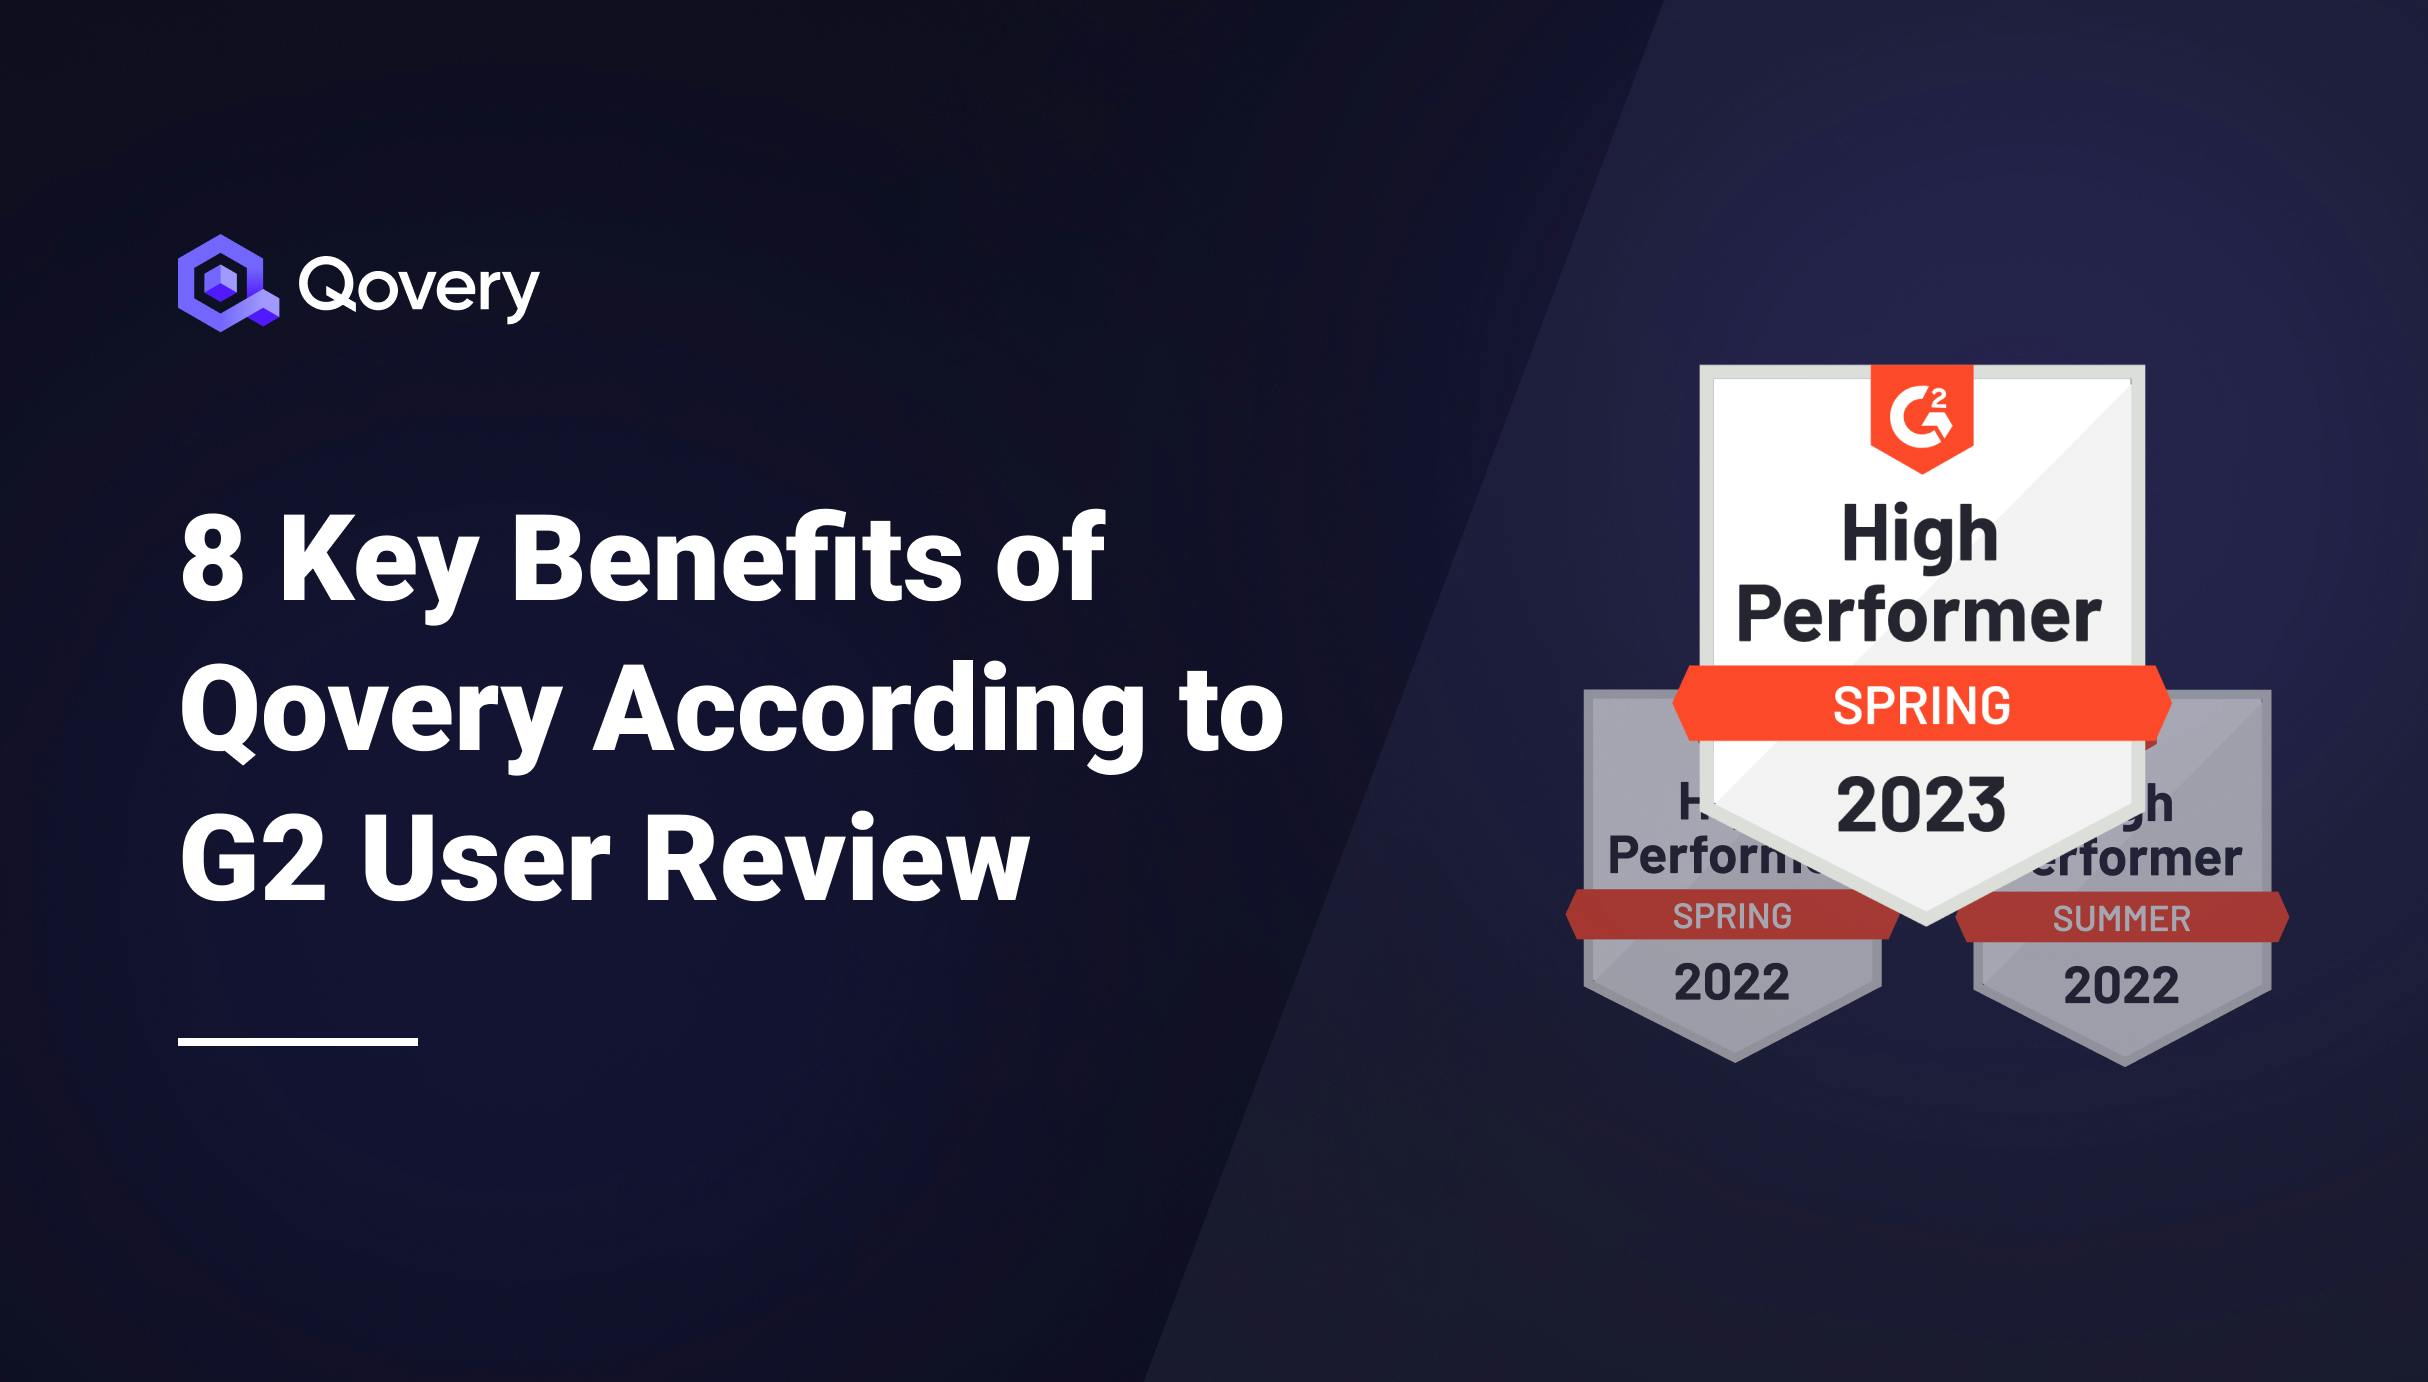 8 Key Benefits of Qovery According to G2 User Review - Qovery